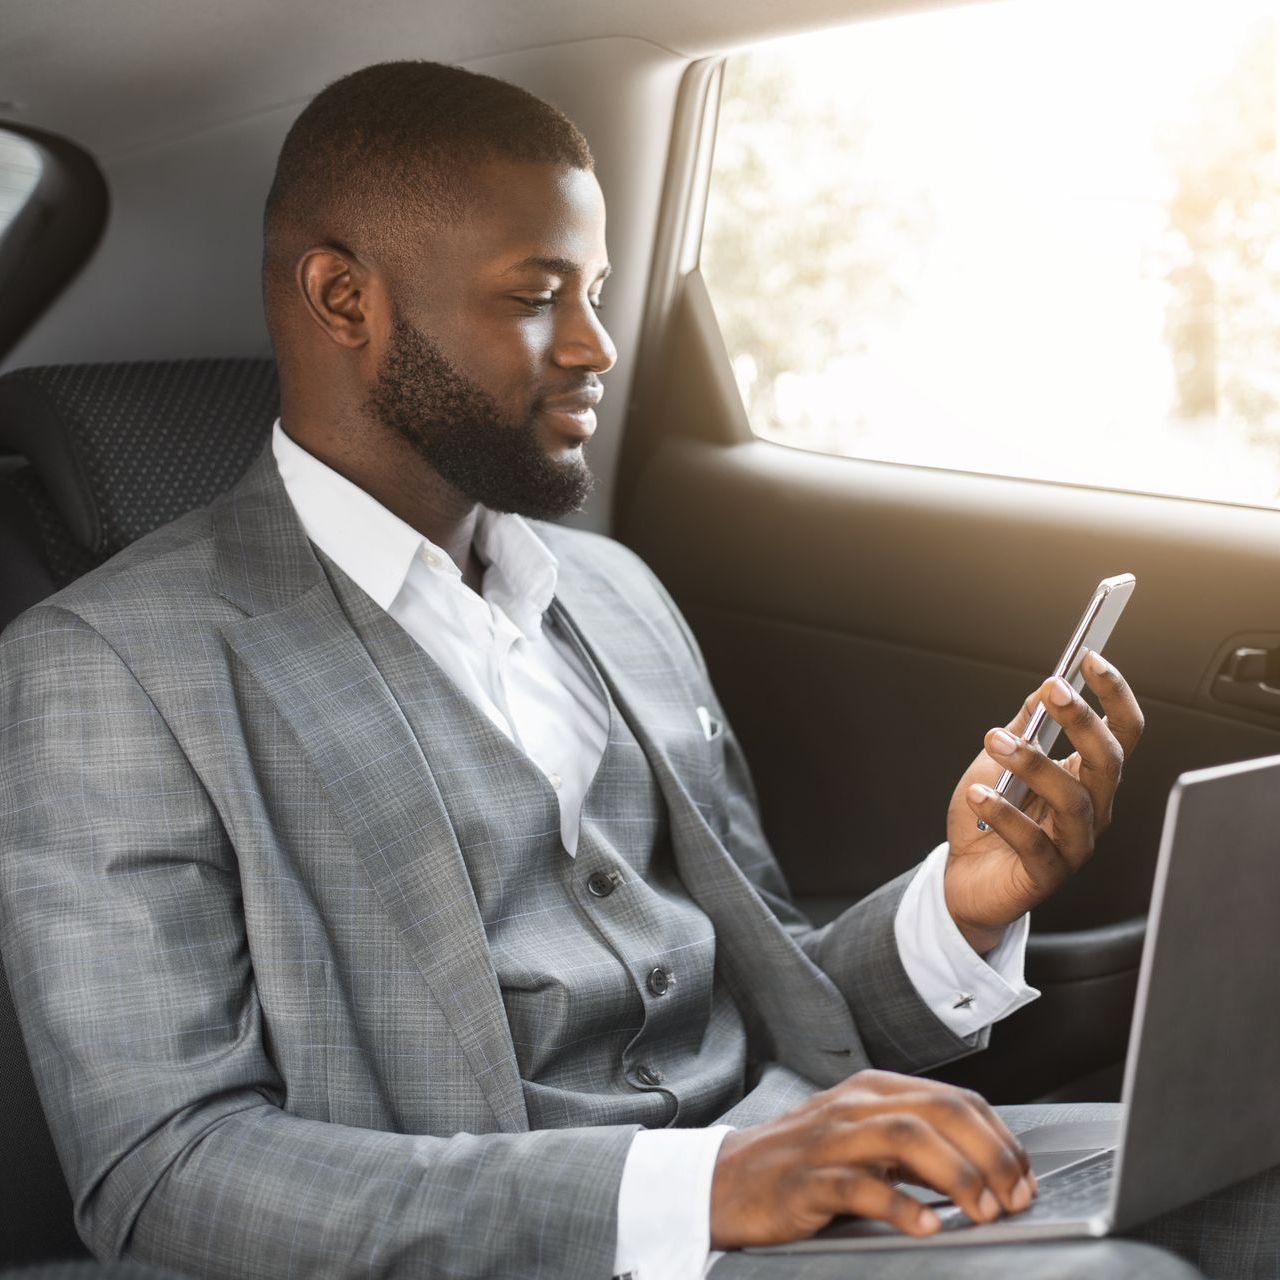 a man in a suit is using a laptop and looking at his phone